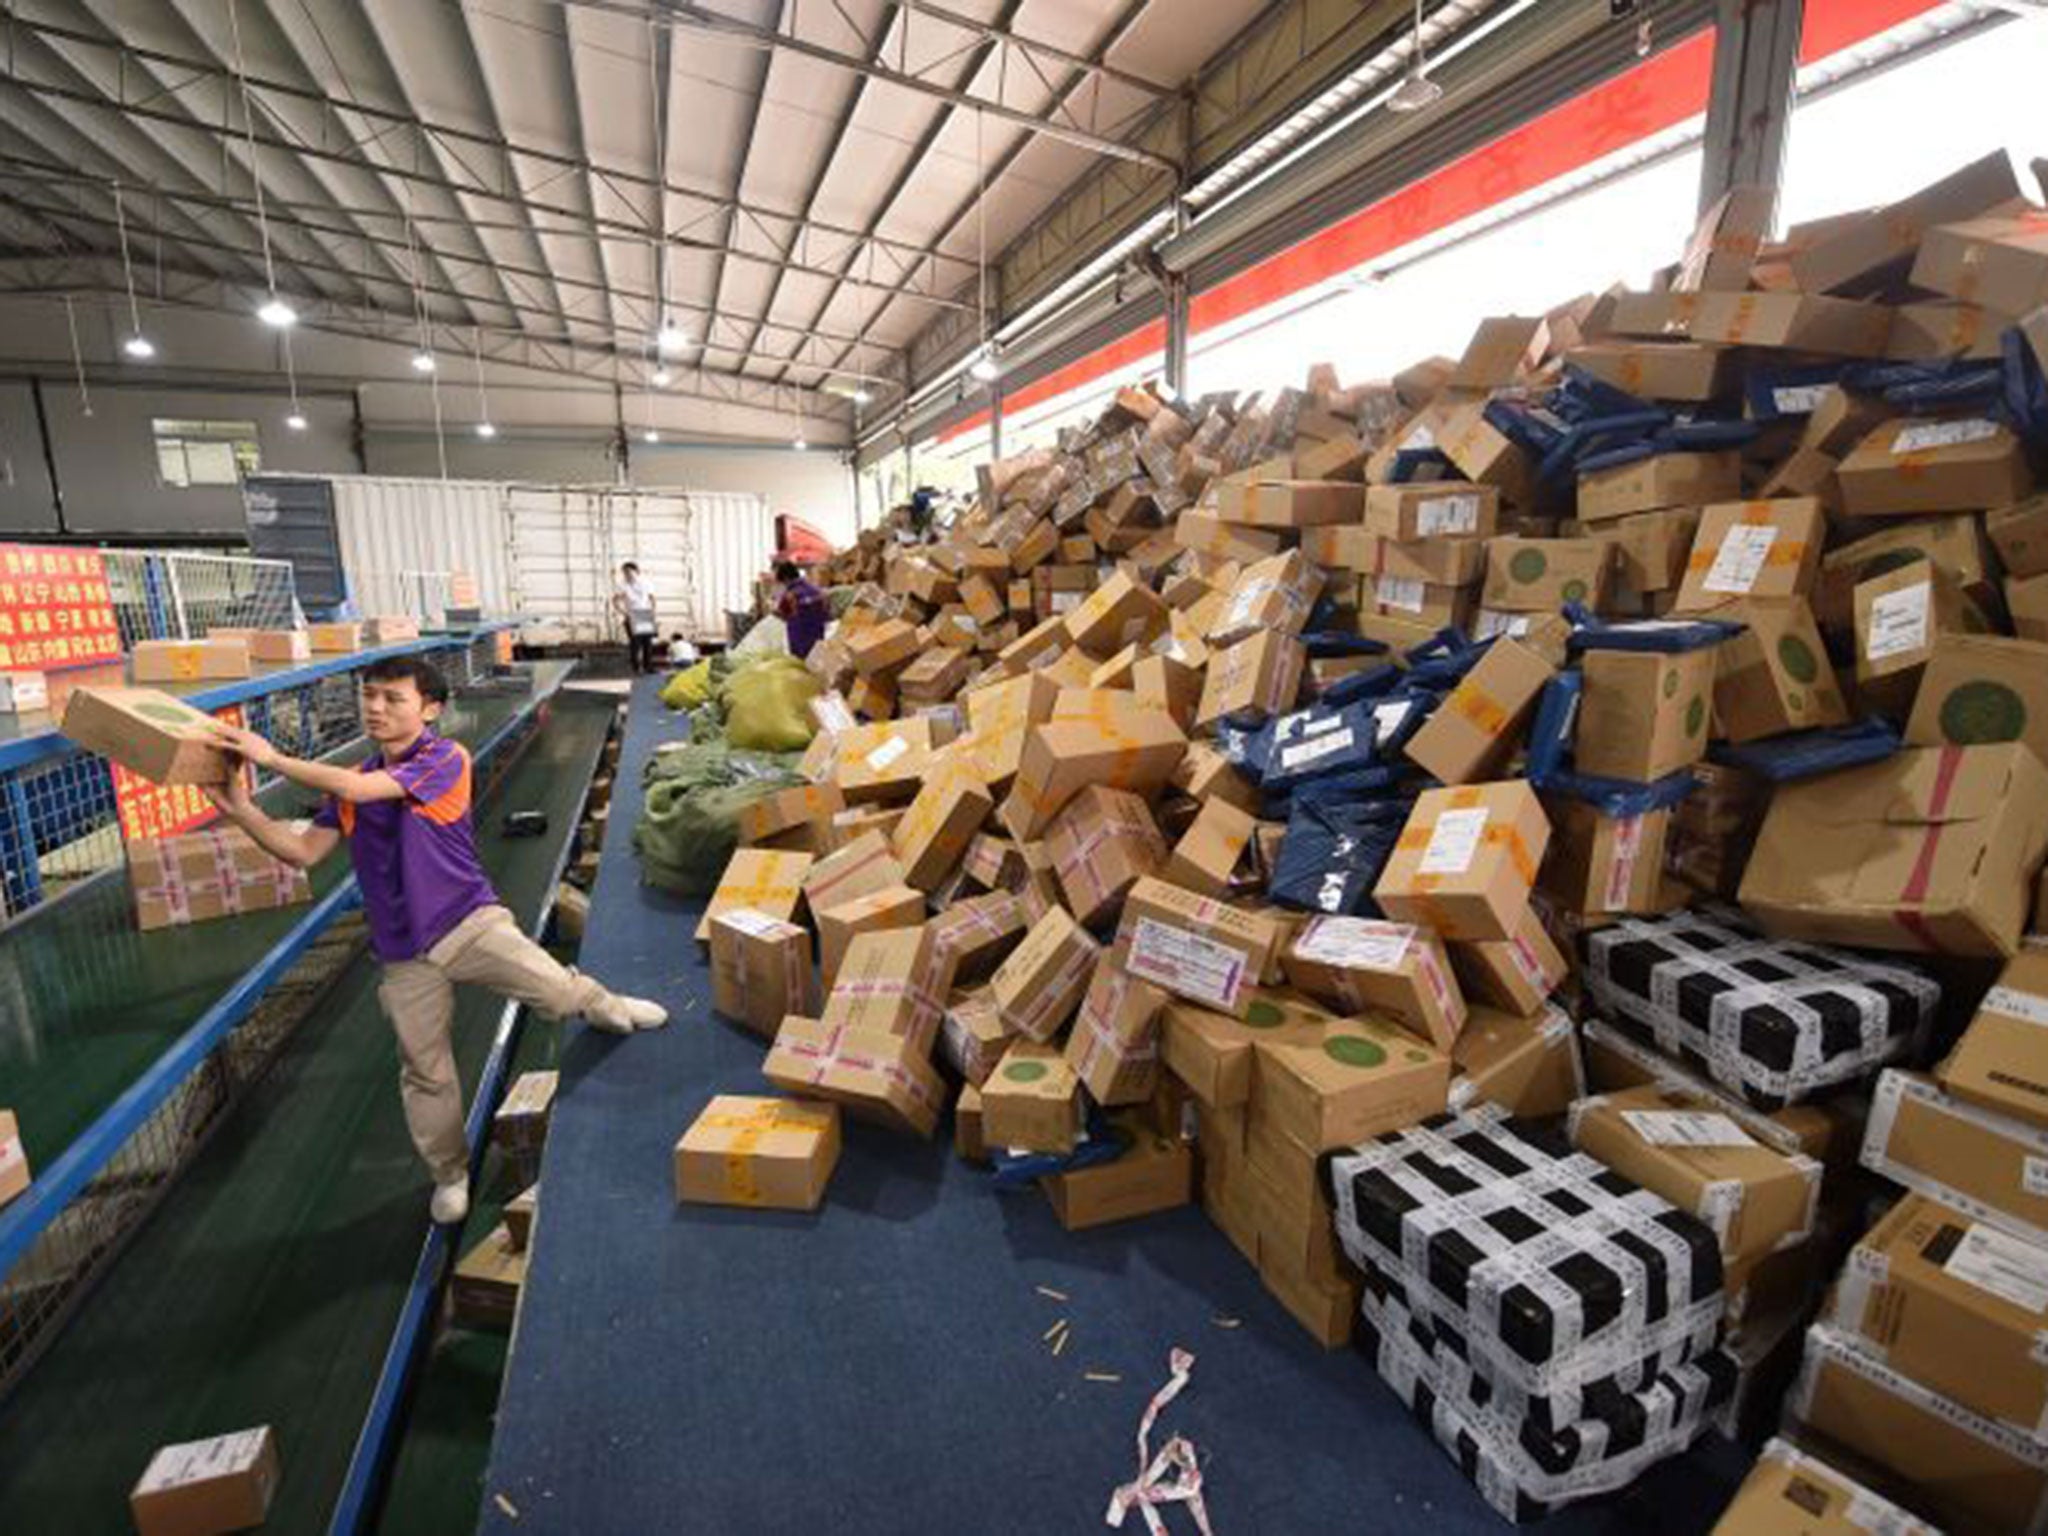 Workers sort out packages at a sorting center in Guangzhou, capital of south China's Guangdong Province, Nov. 11, 2015